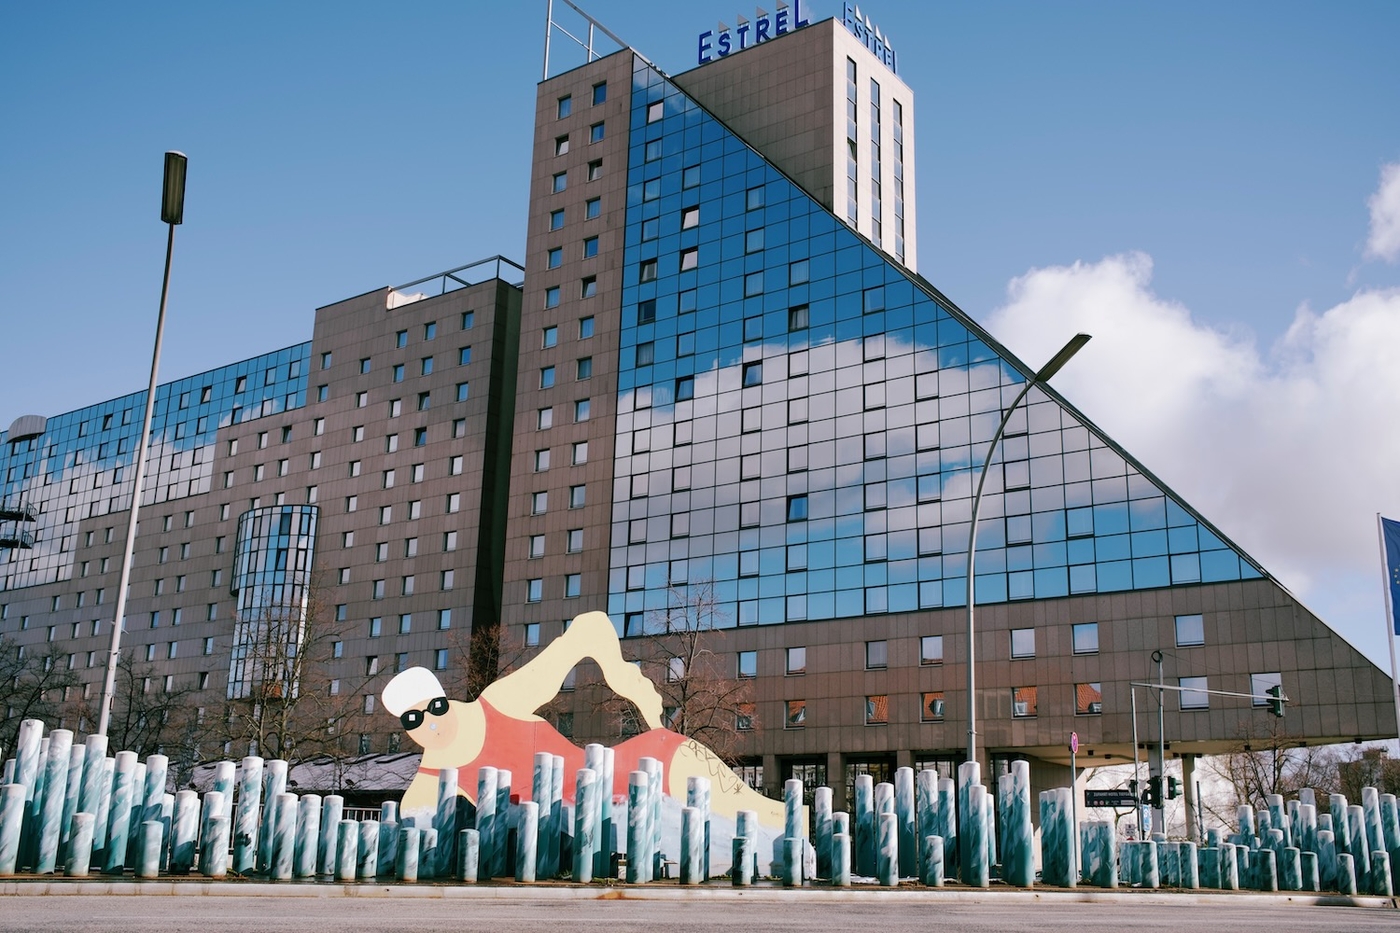 A swimmer sculpture in front of a large glass building